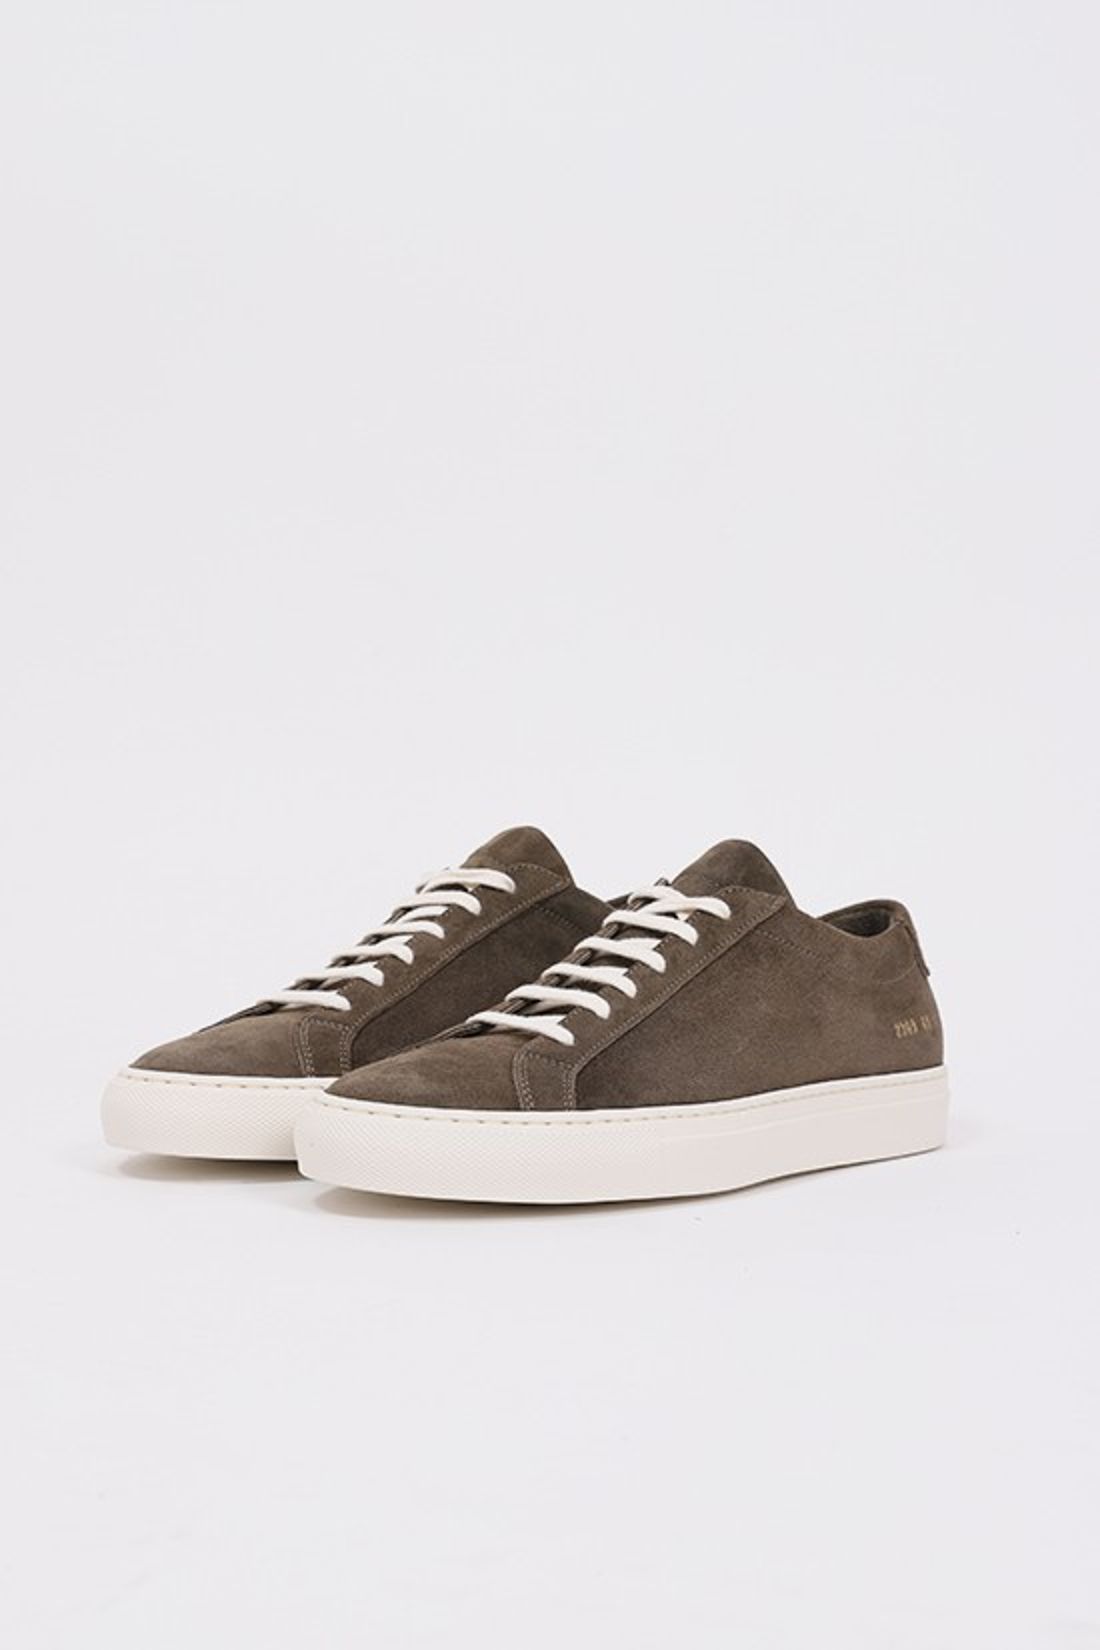 COMMON PROJECTS / Achilles low waxed suede 2309 Olive 1010